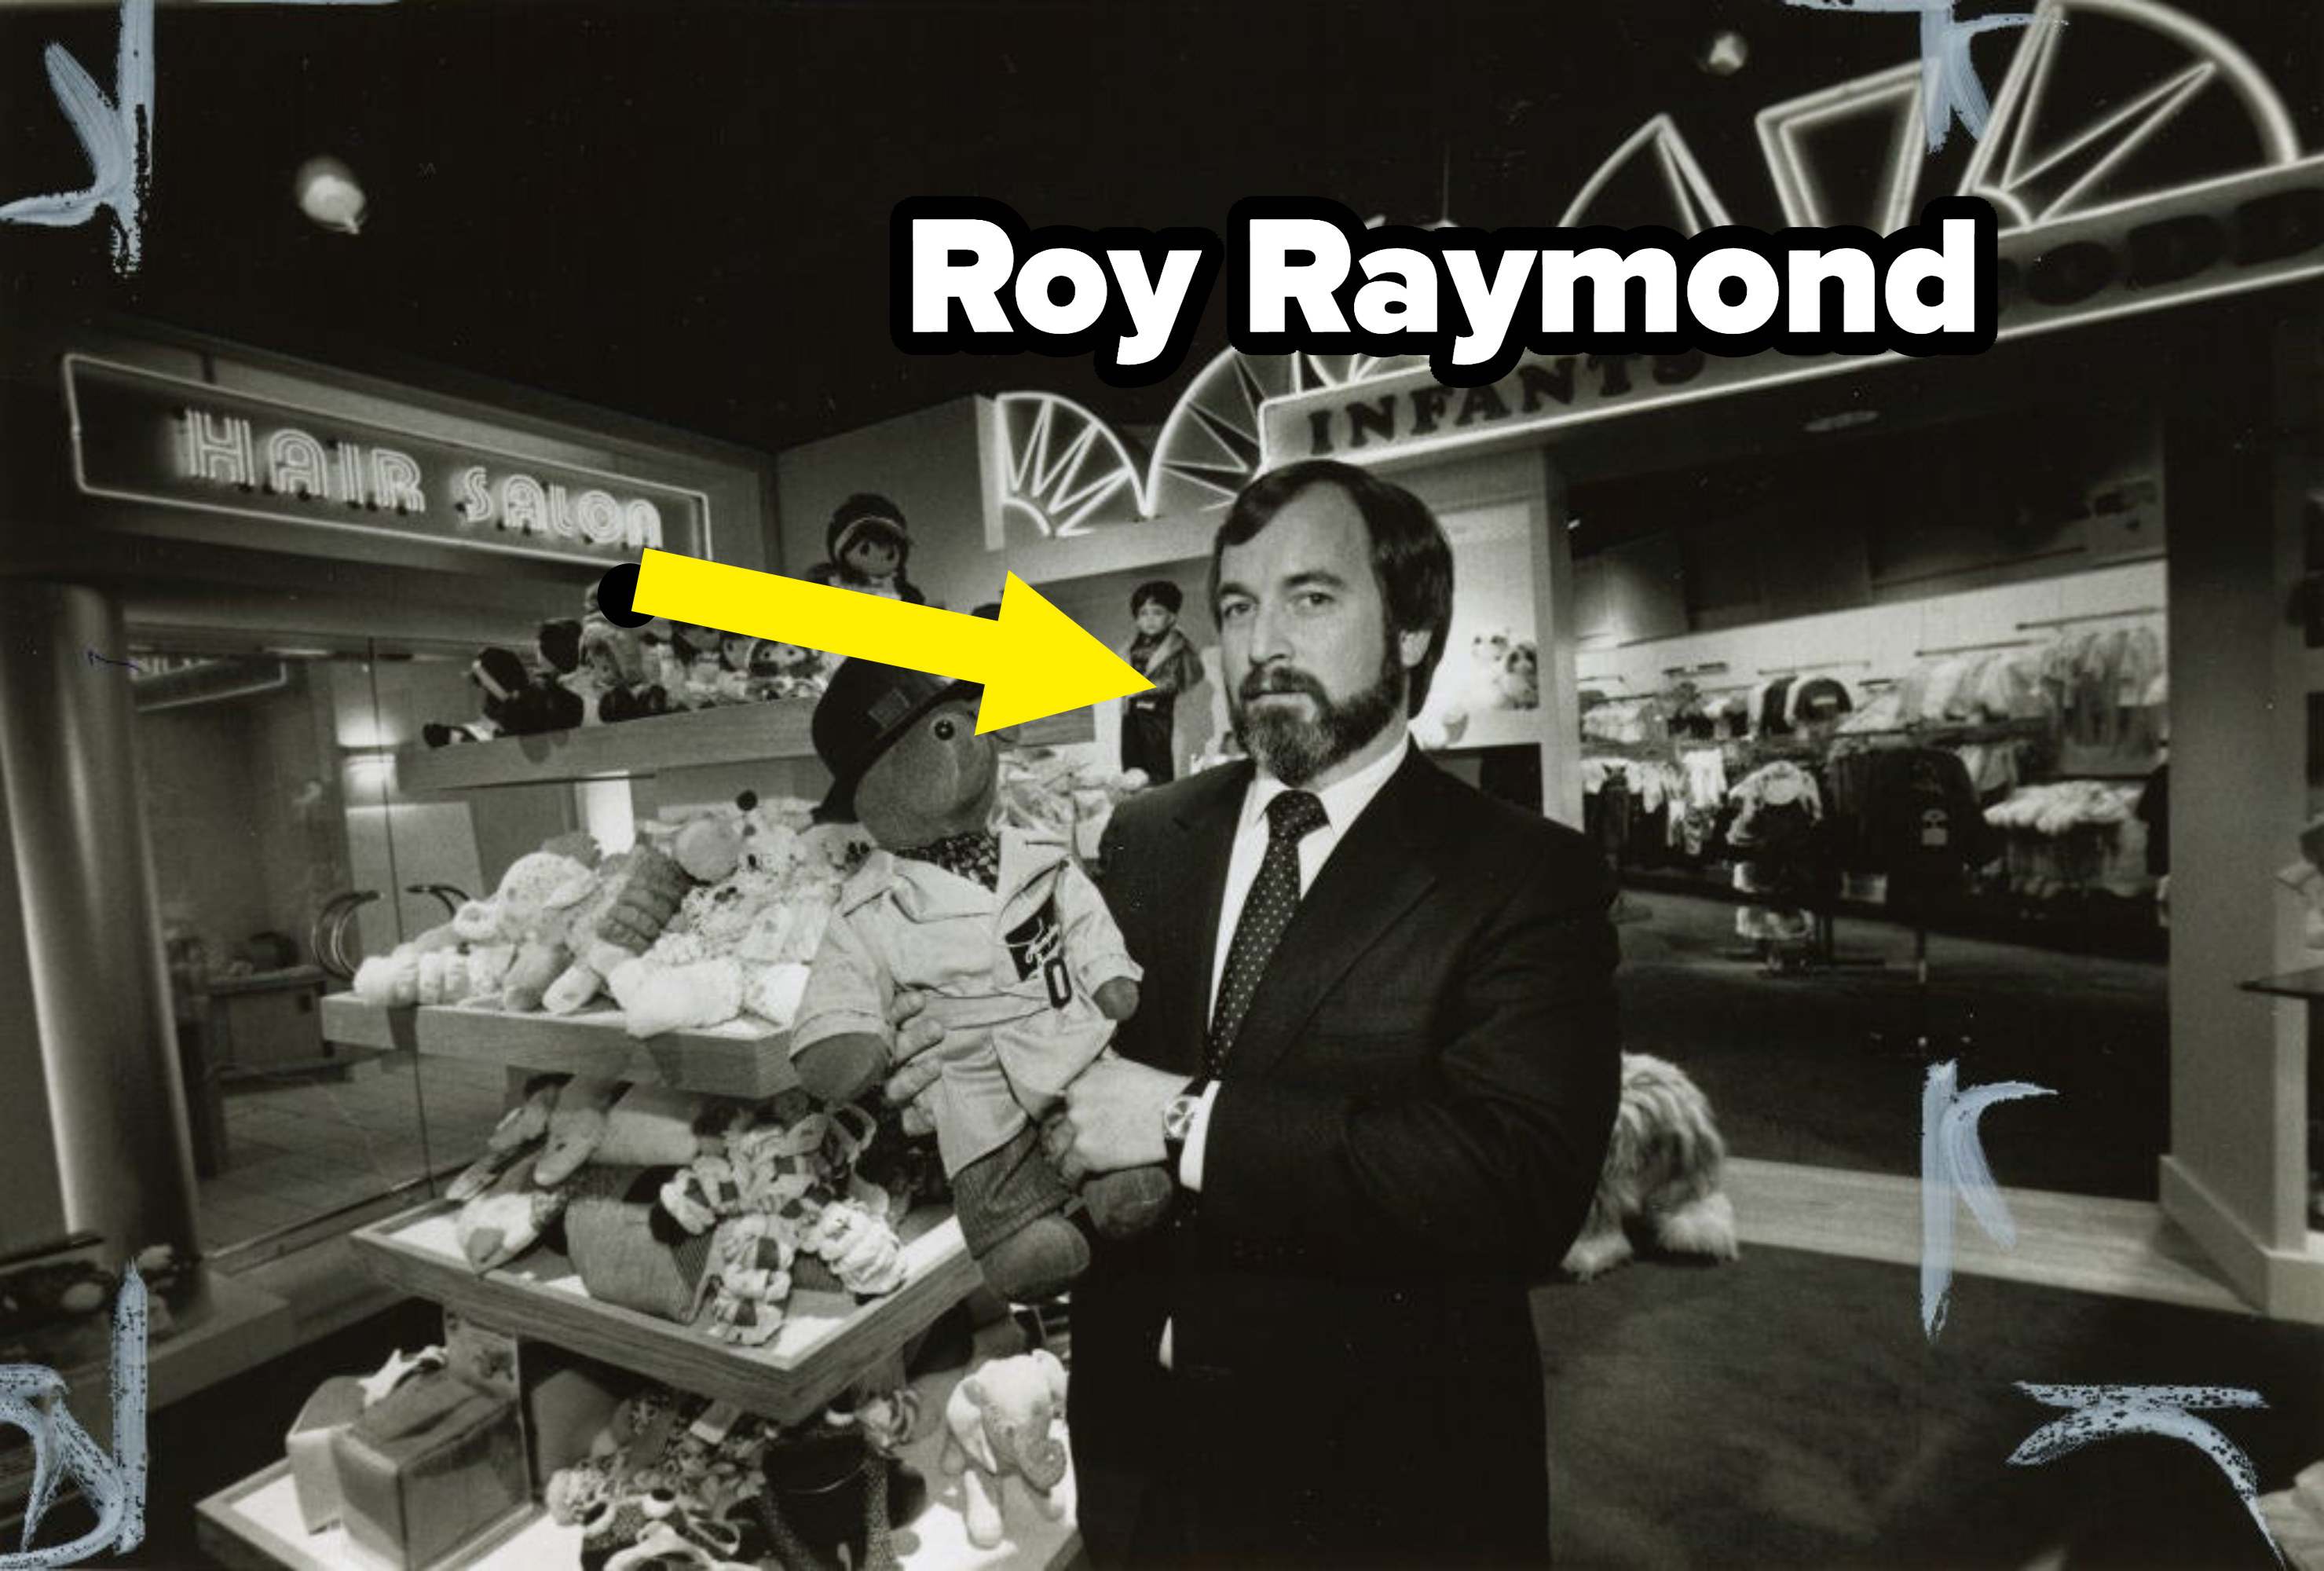 Roy Raymonf holding a stuffed animal in what appears to be a department store